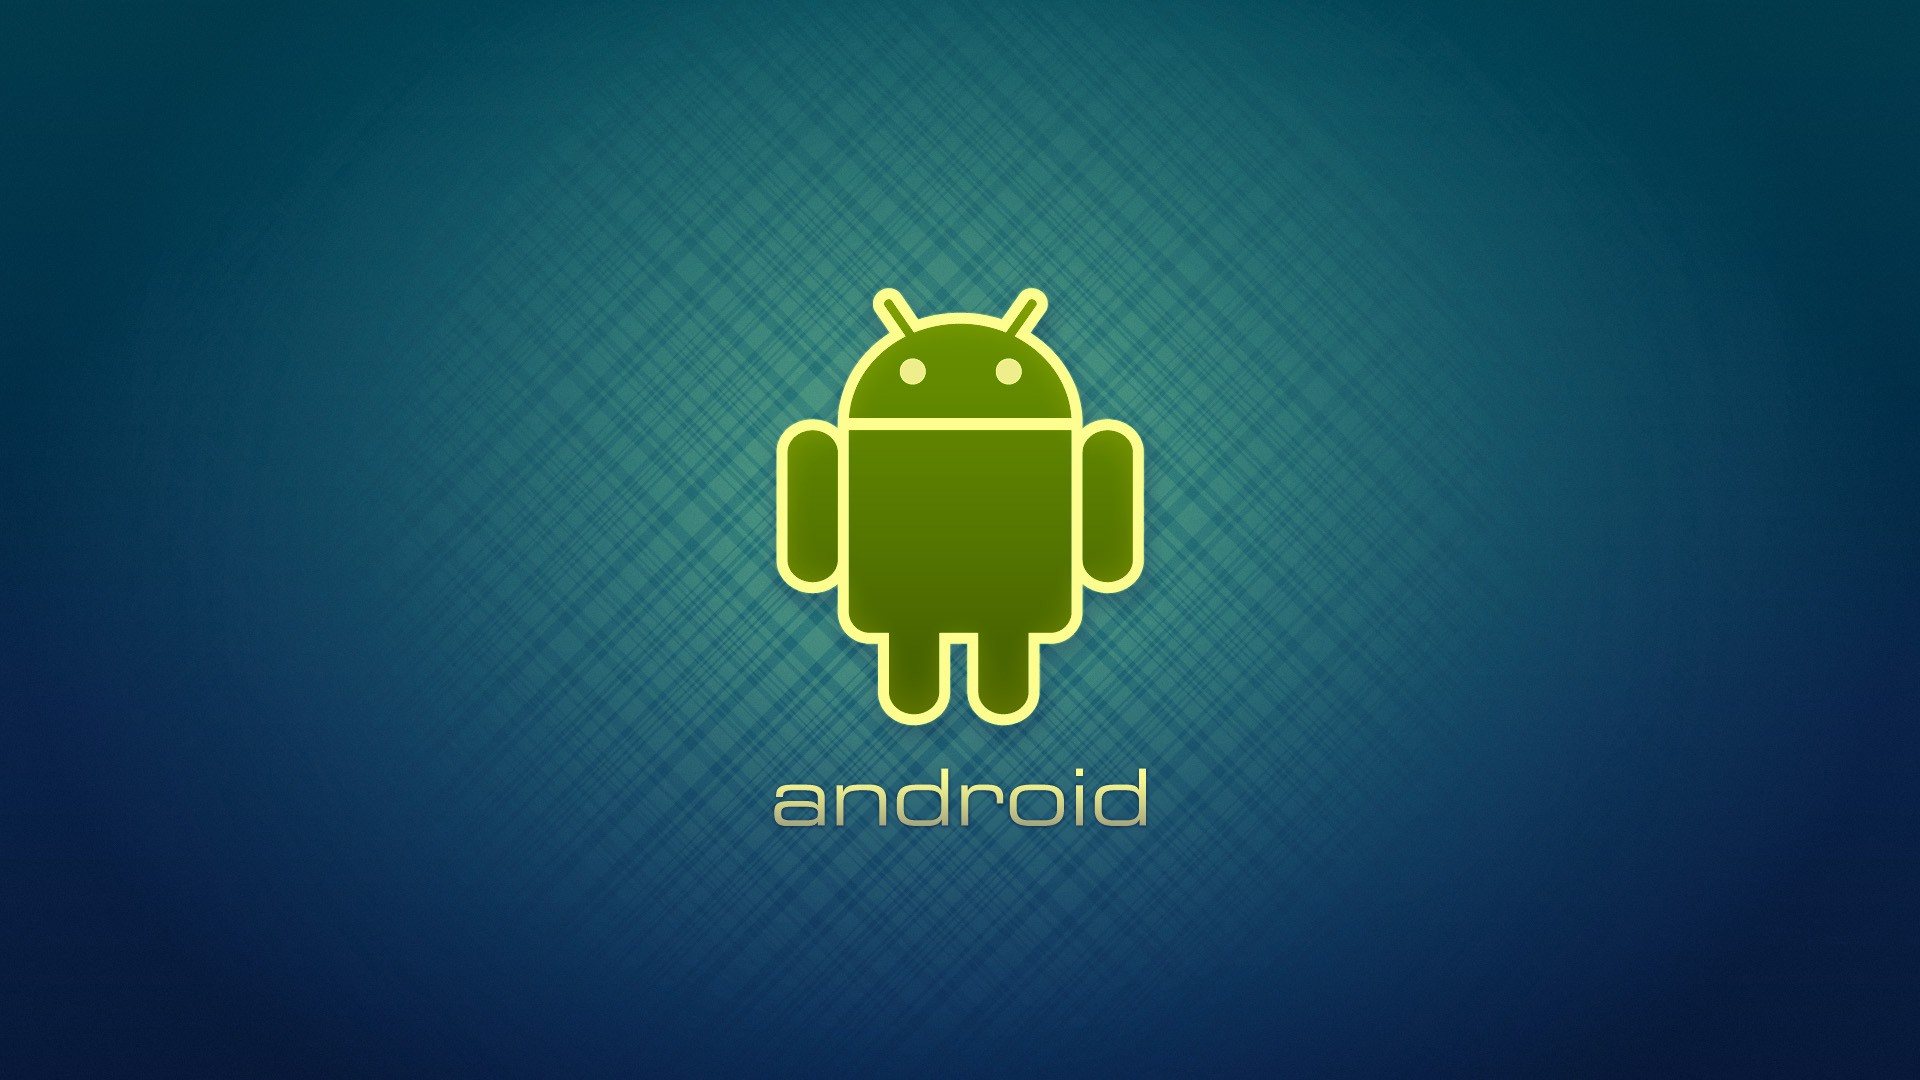 Android Live Wallpaper Background HD Jpg